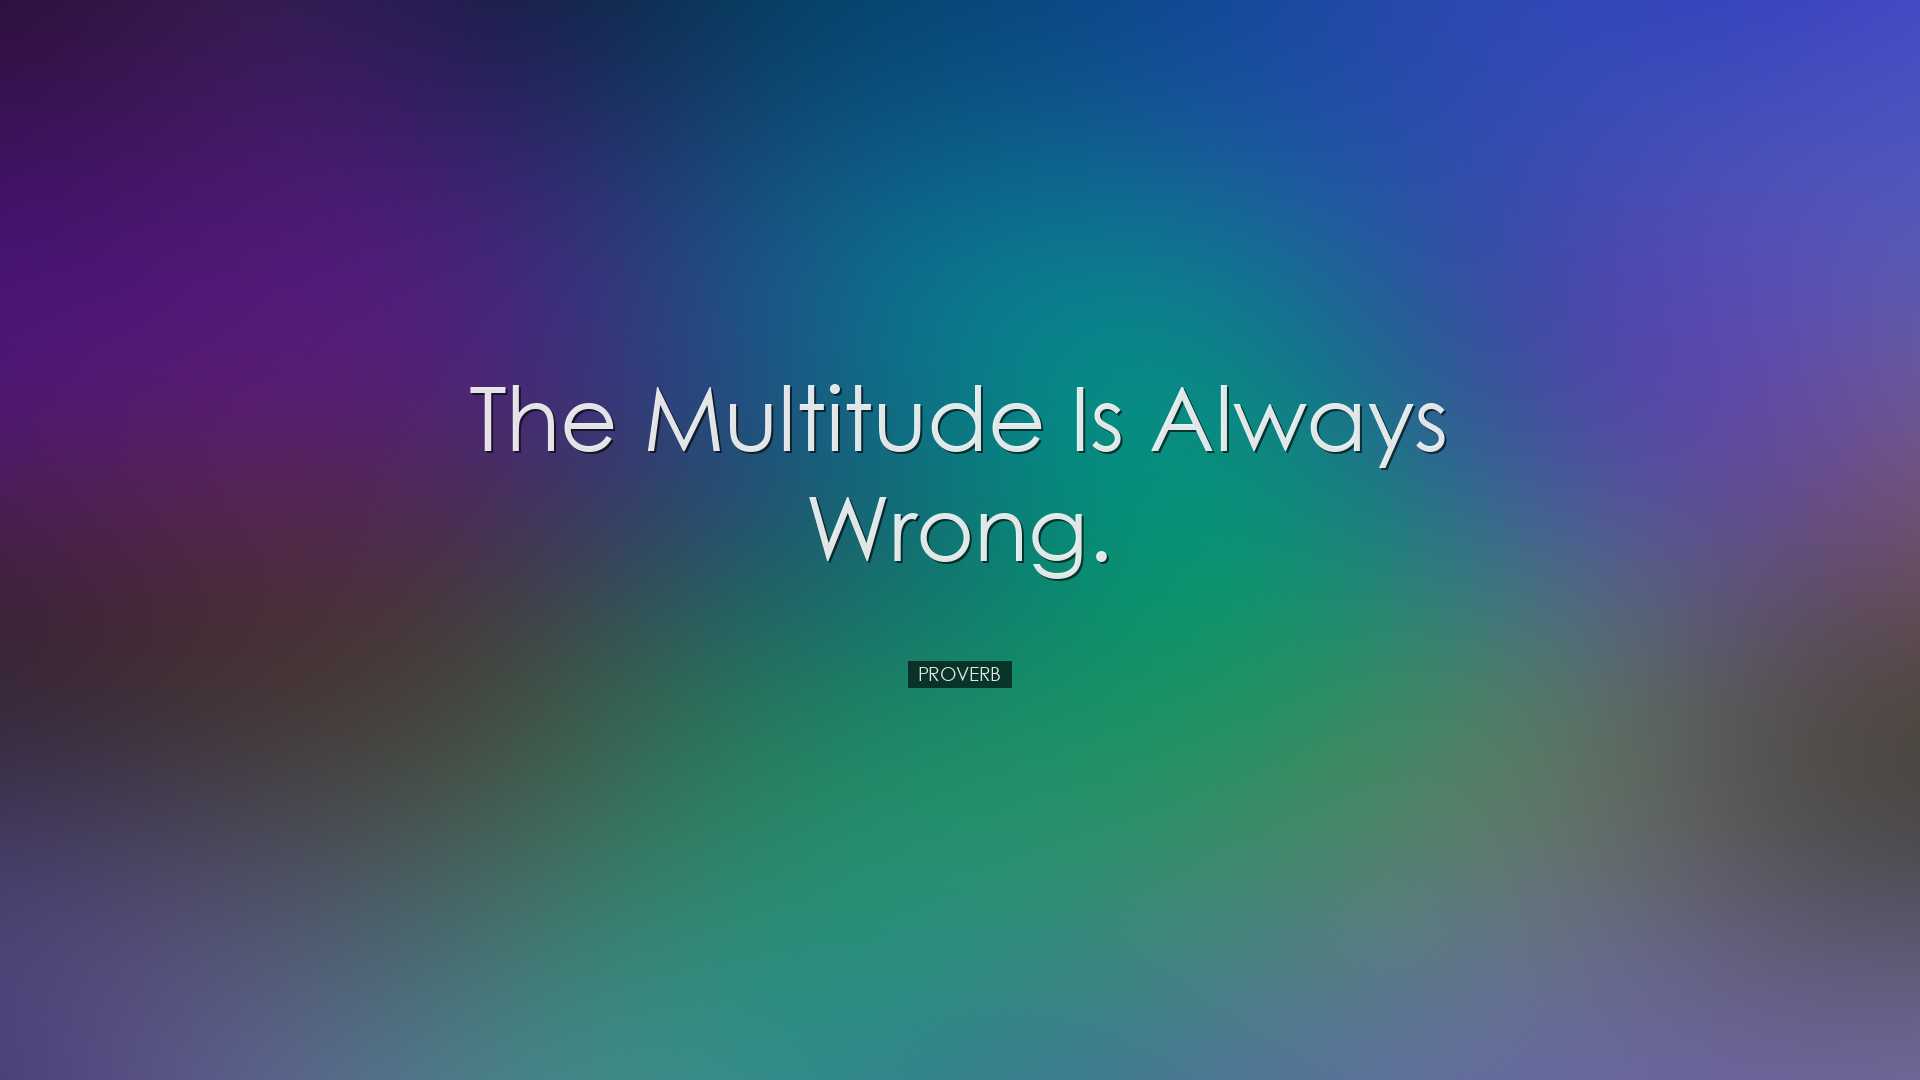 The multitude is always wrong. - Proverb